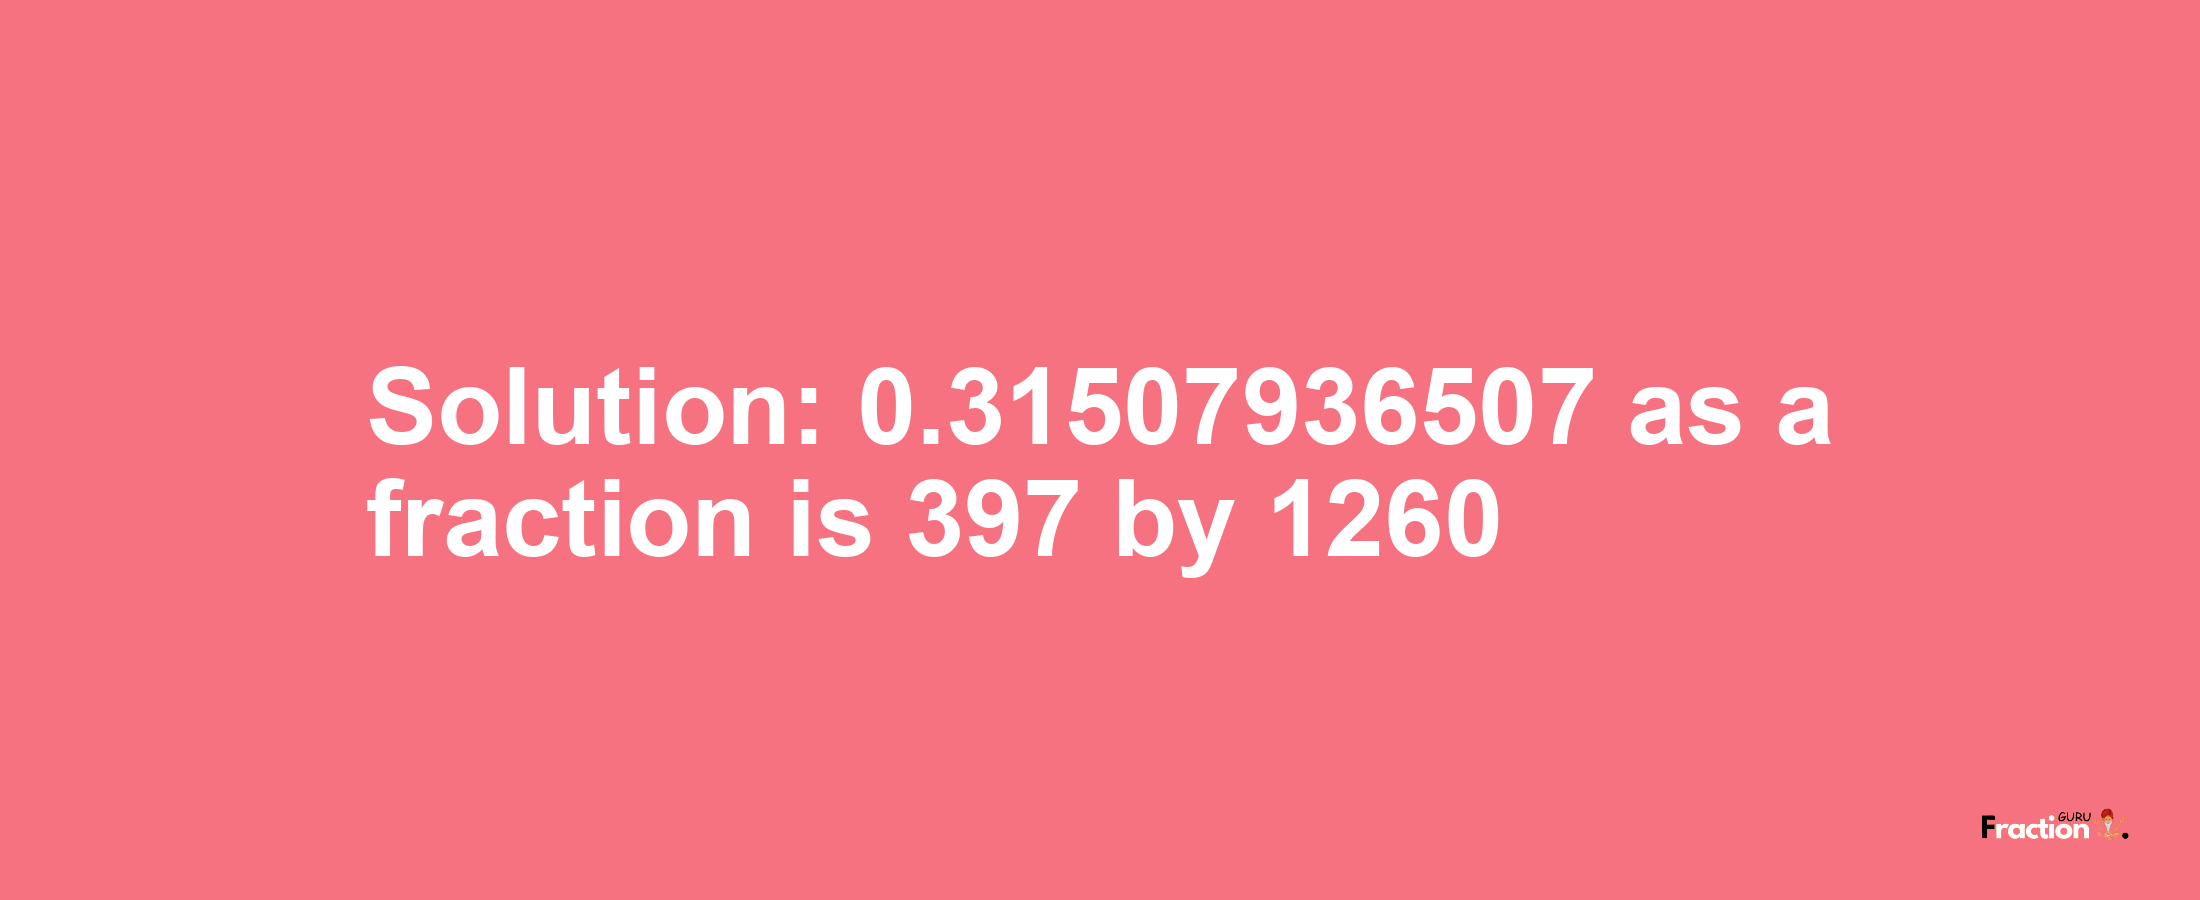 Solution:0.31507936507 as a fraction is 397/1260